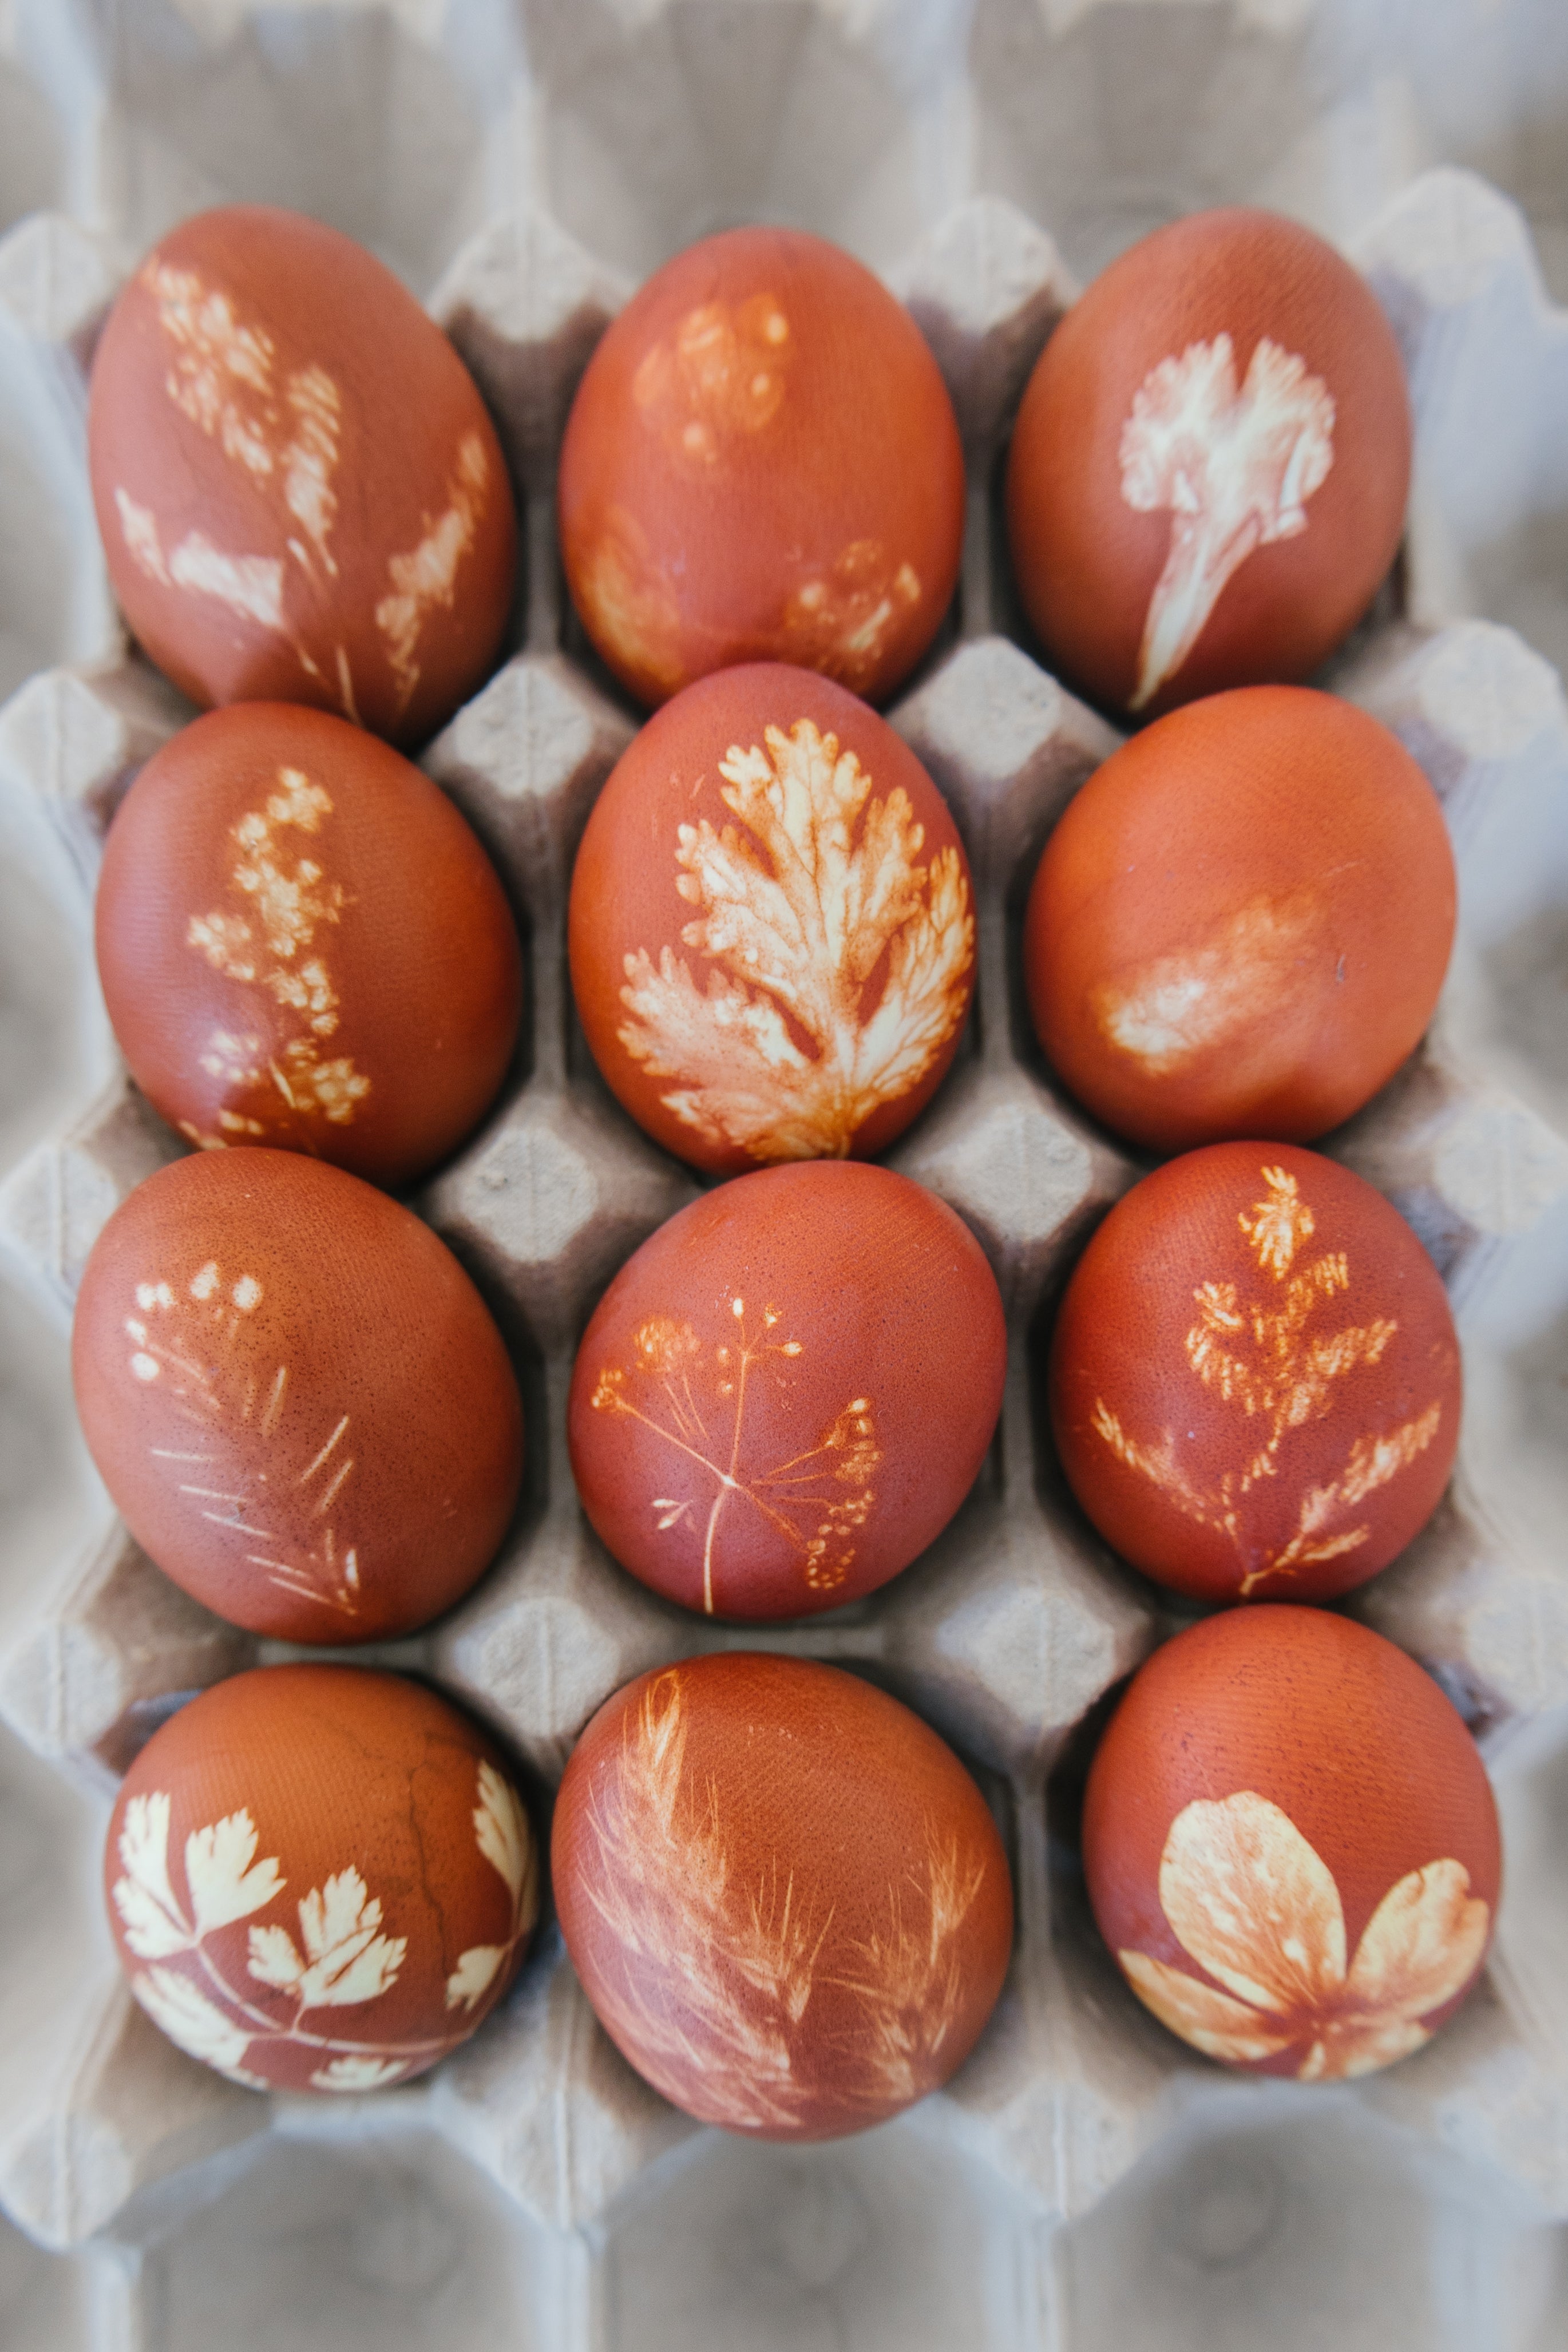 Onion dyed Easter eggs with herb and flower stencilled design